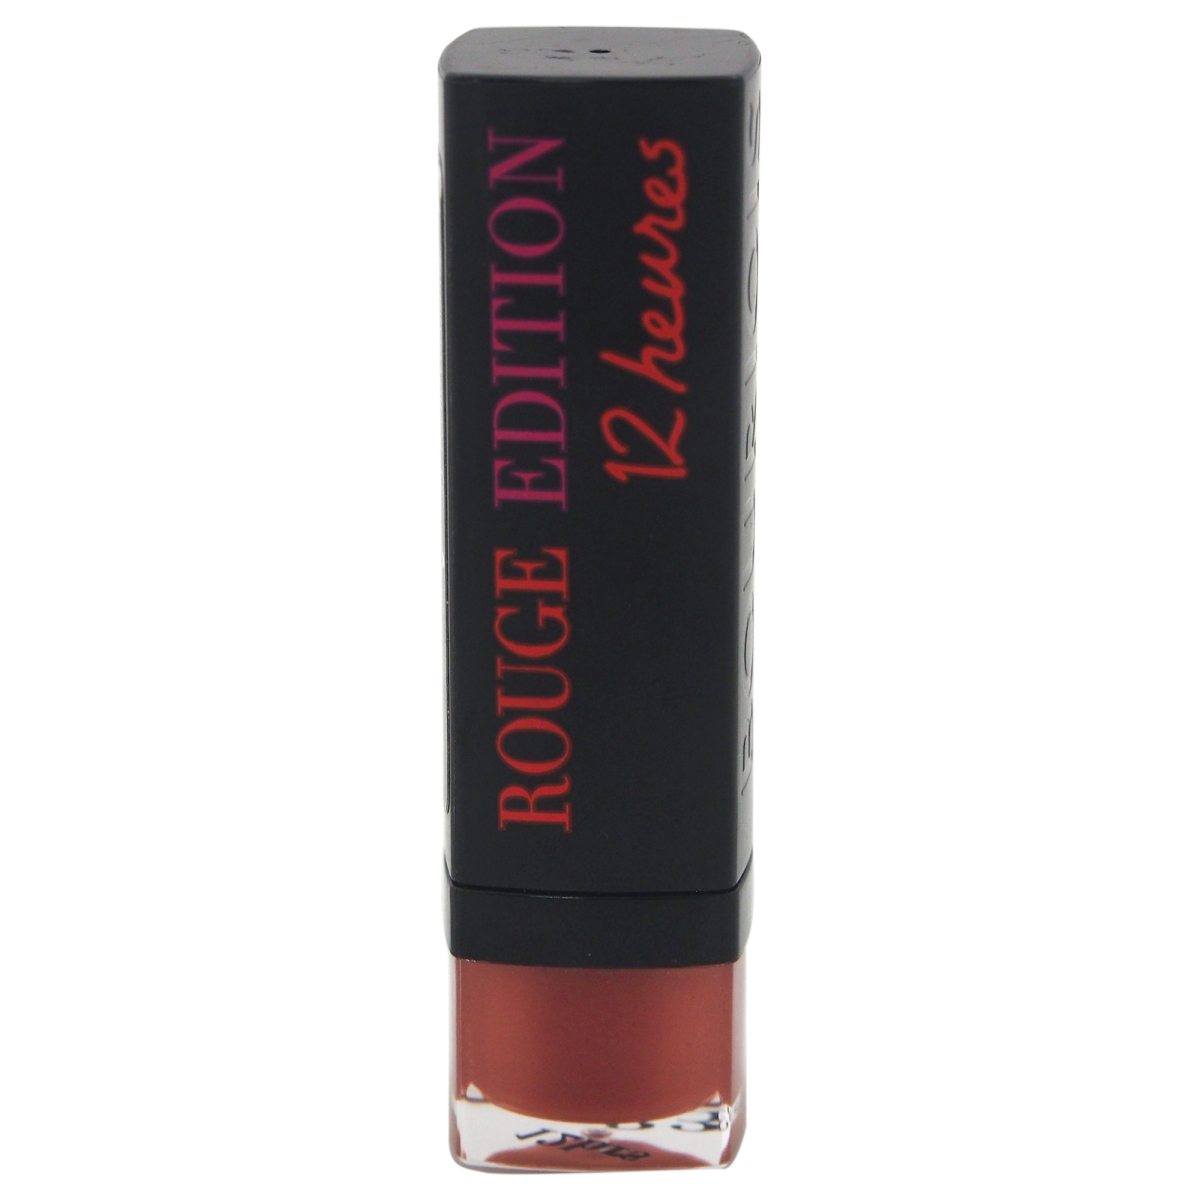 W-c-9706 0.12 Oz No. 33 Rouge Edition 12 Hours Peche Cocooning Lipstick For Women